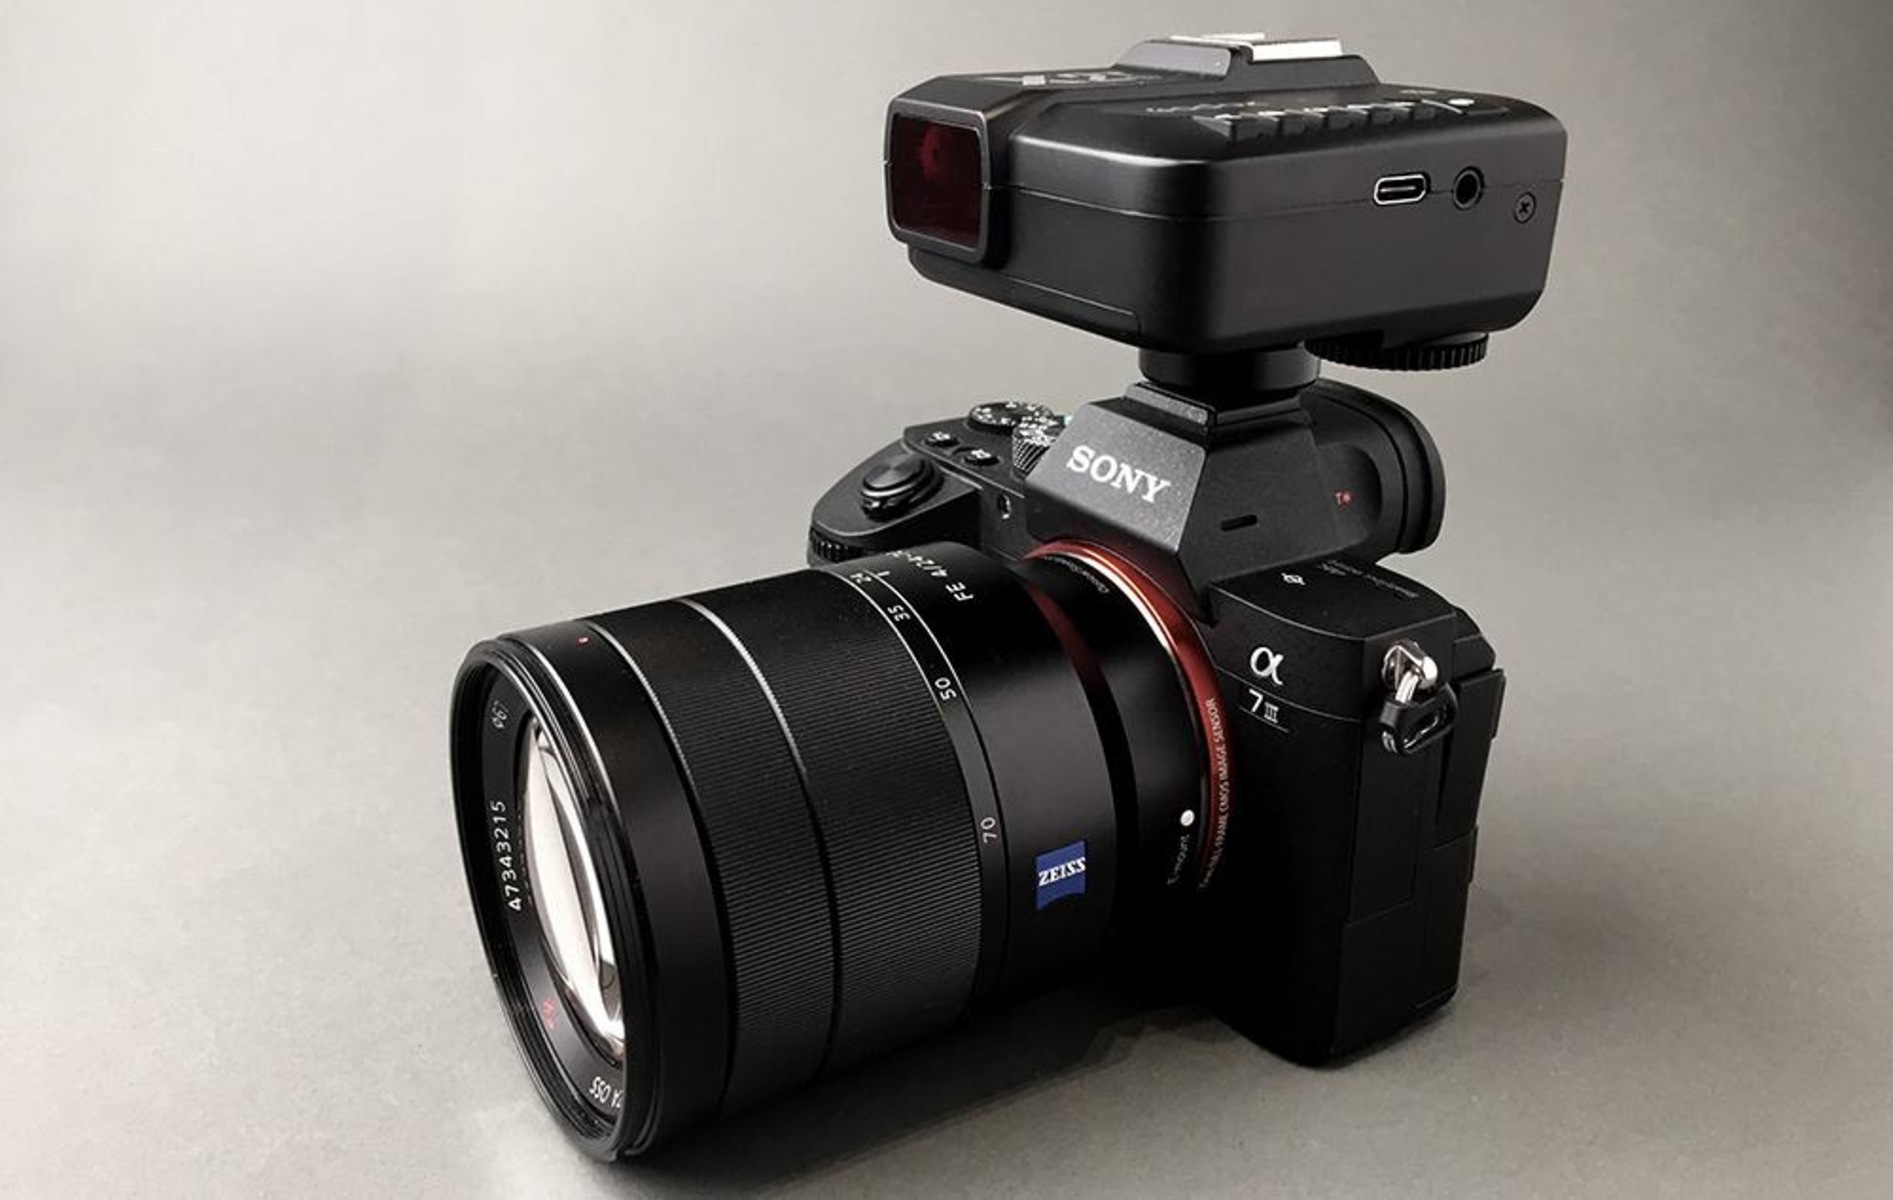 How To Photograph With A Sony Mirrorless Camera With Off-Camera Flash